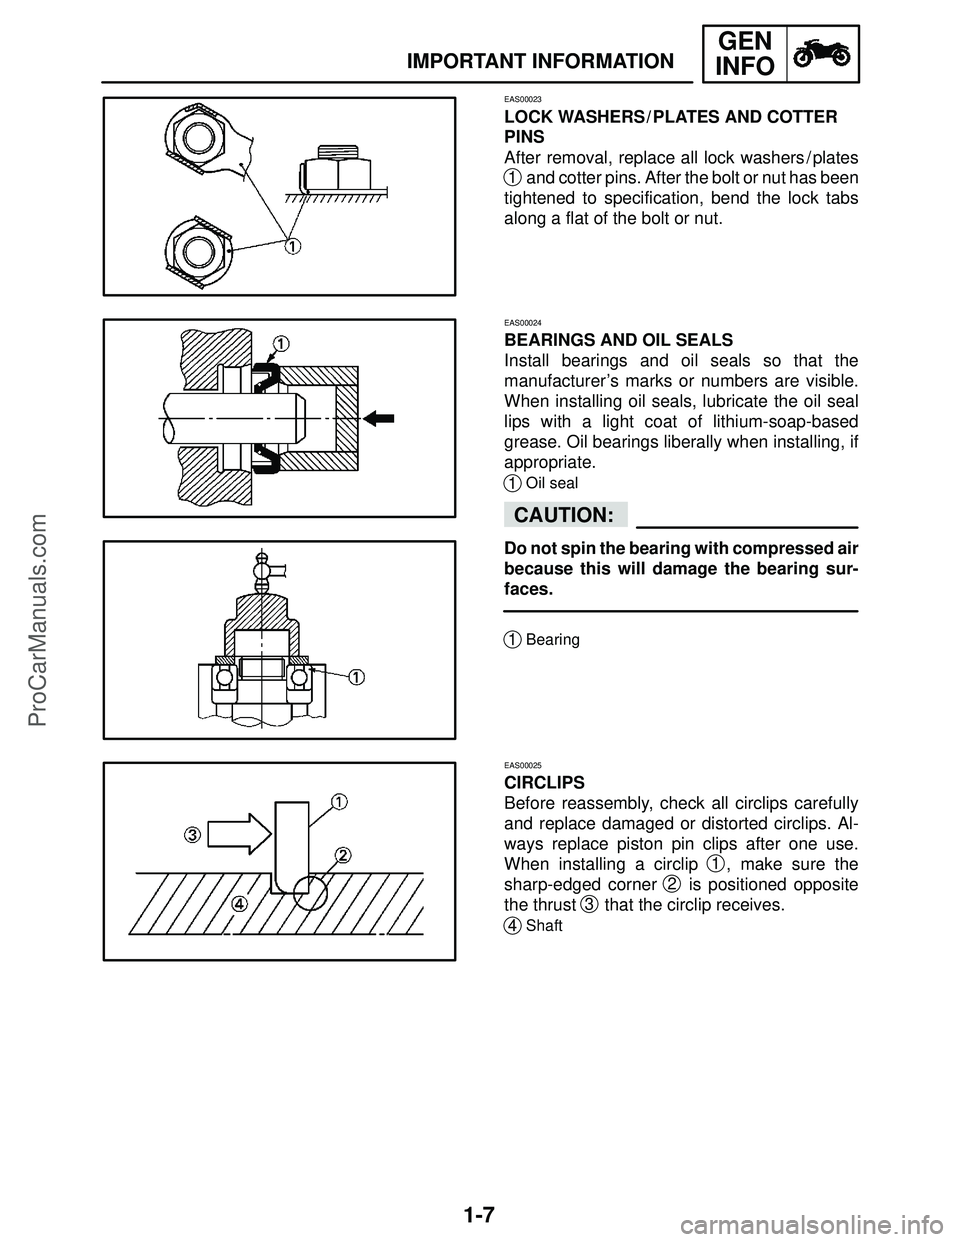 YAMAHA YZF-R1SC 2004  Service Manual 1-7
IMPORTANT INFORMATION
GEN
INFO
CAUTION:
EAS00023
LOCK WASHERS / PLATES AND COTTER
PINS
After removal, replace all lock washers / plates
1 and cotter pins. After the bolt or nut has been
tightened 